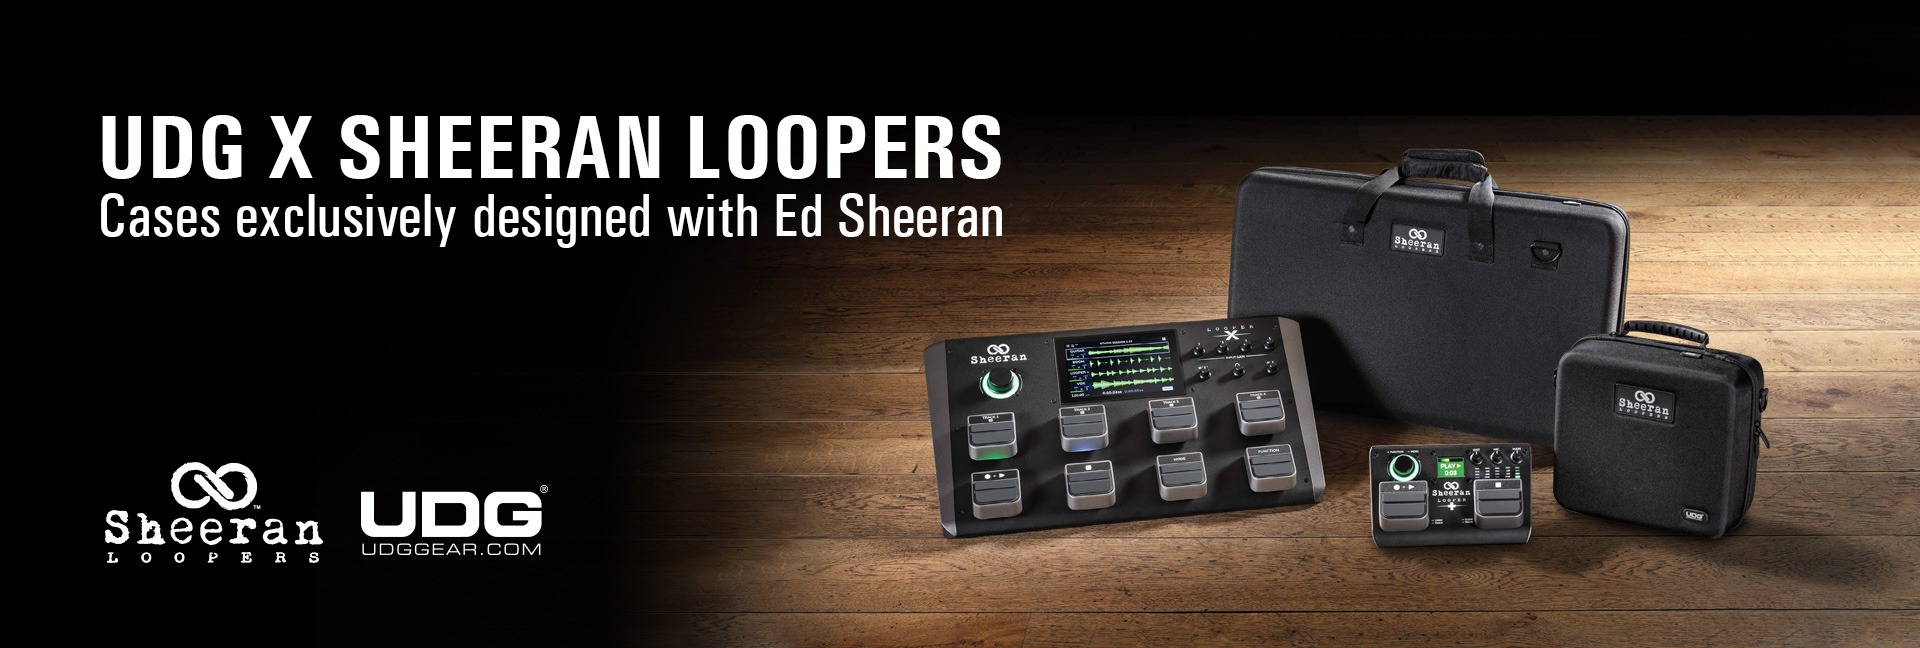 <div>UDG X Sheeran Loopers</div><div><strong>Cases exclusively designed with Ed Sheeran</strong></div>